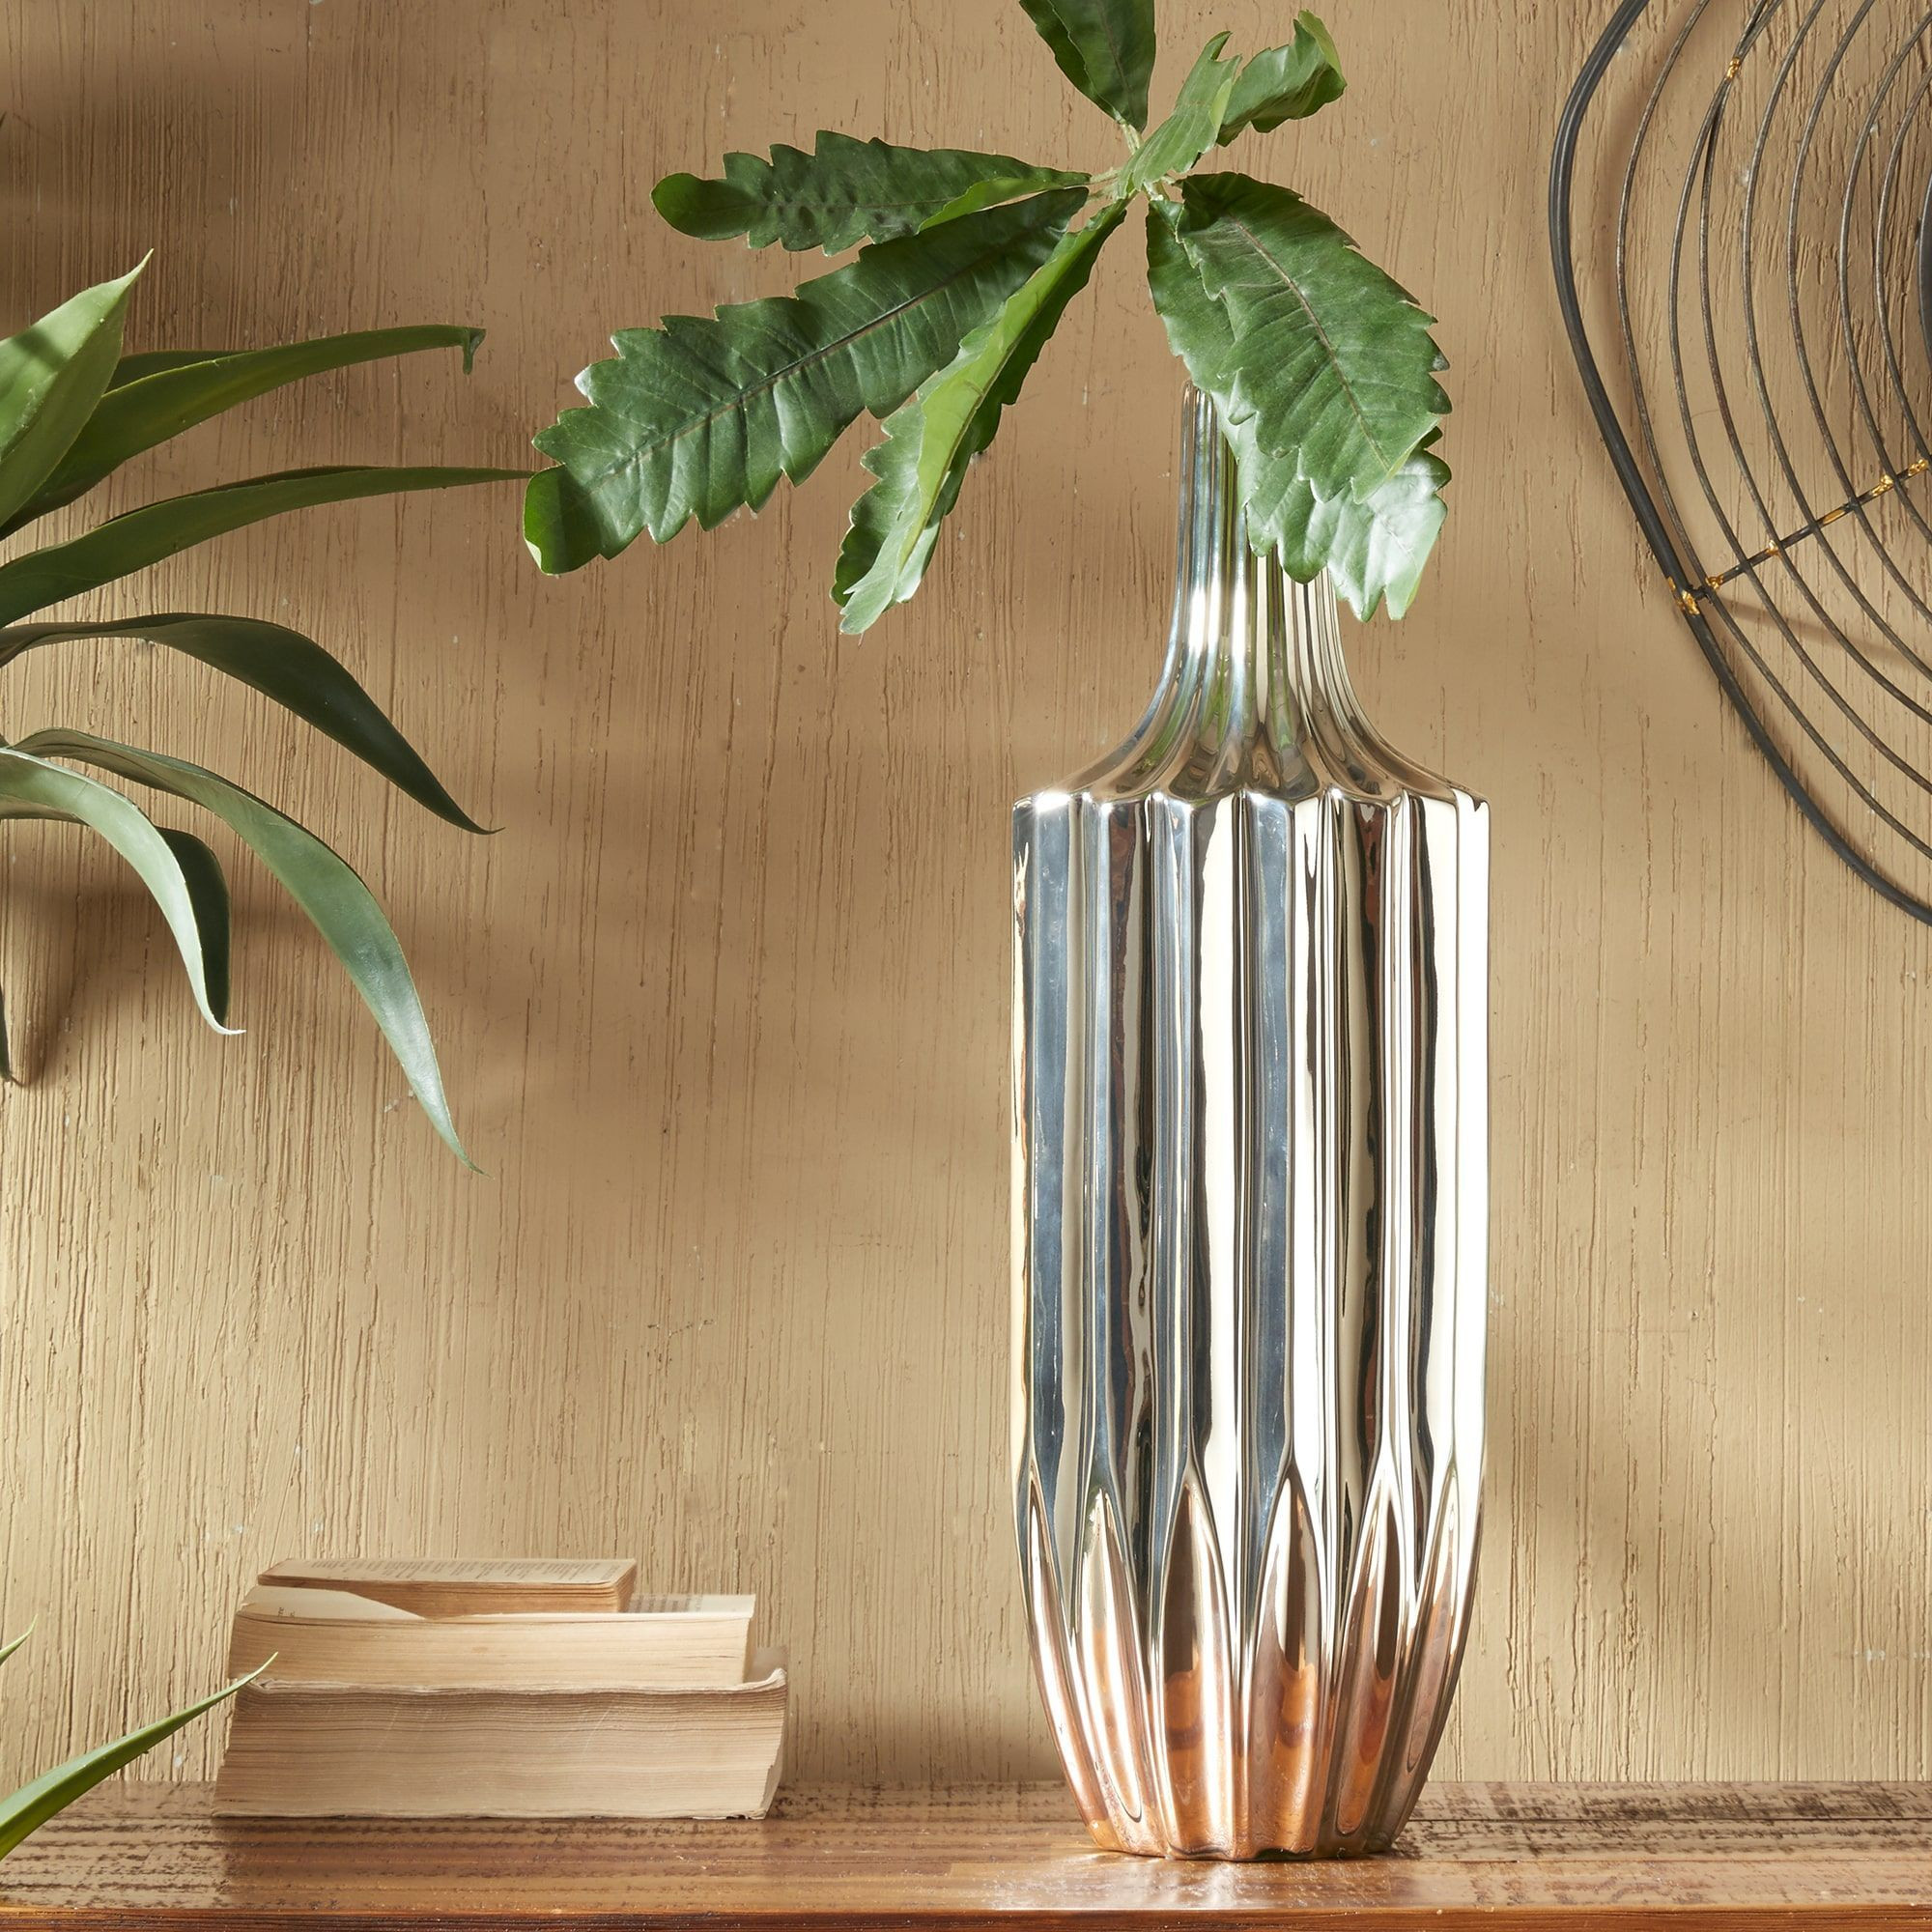 22 Spectacular Flowers with Free Delivery and Free Vase 2024 free download flowers with free delivery and free vase of ink ivy bartlett silver ceramic vase medium 6 75w x 6 75d x pertaining to inkivy bartlett silver ceramic vase medium 6 75w x 6 75d x 19 25h silver